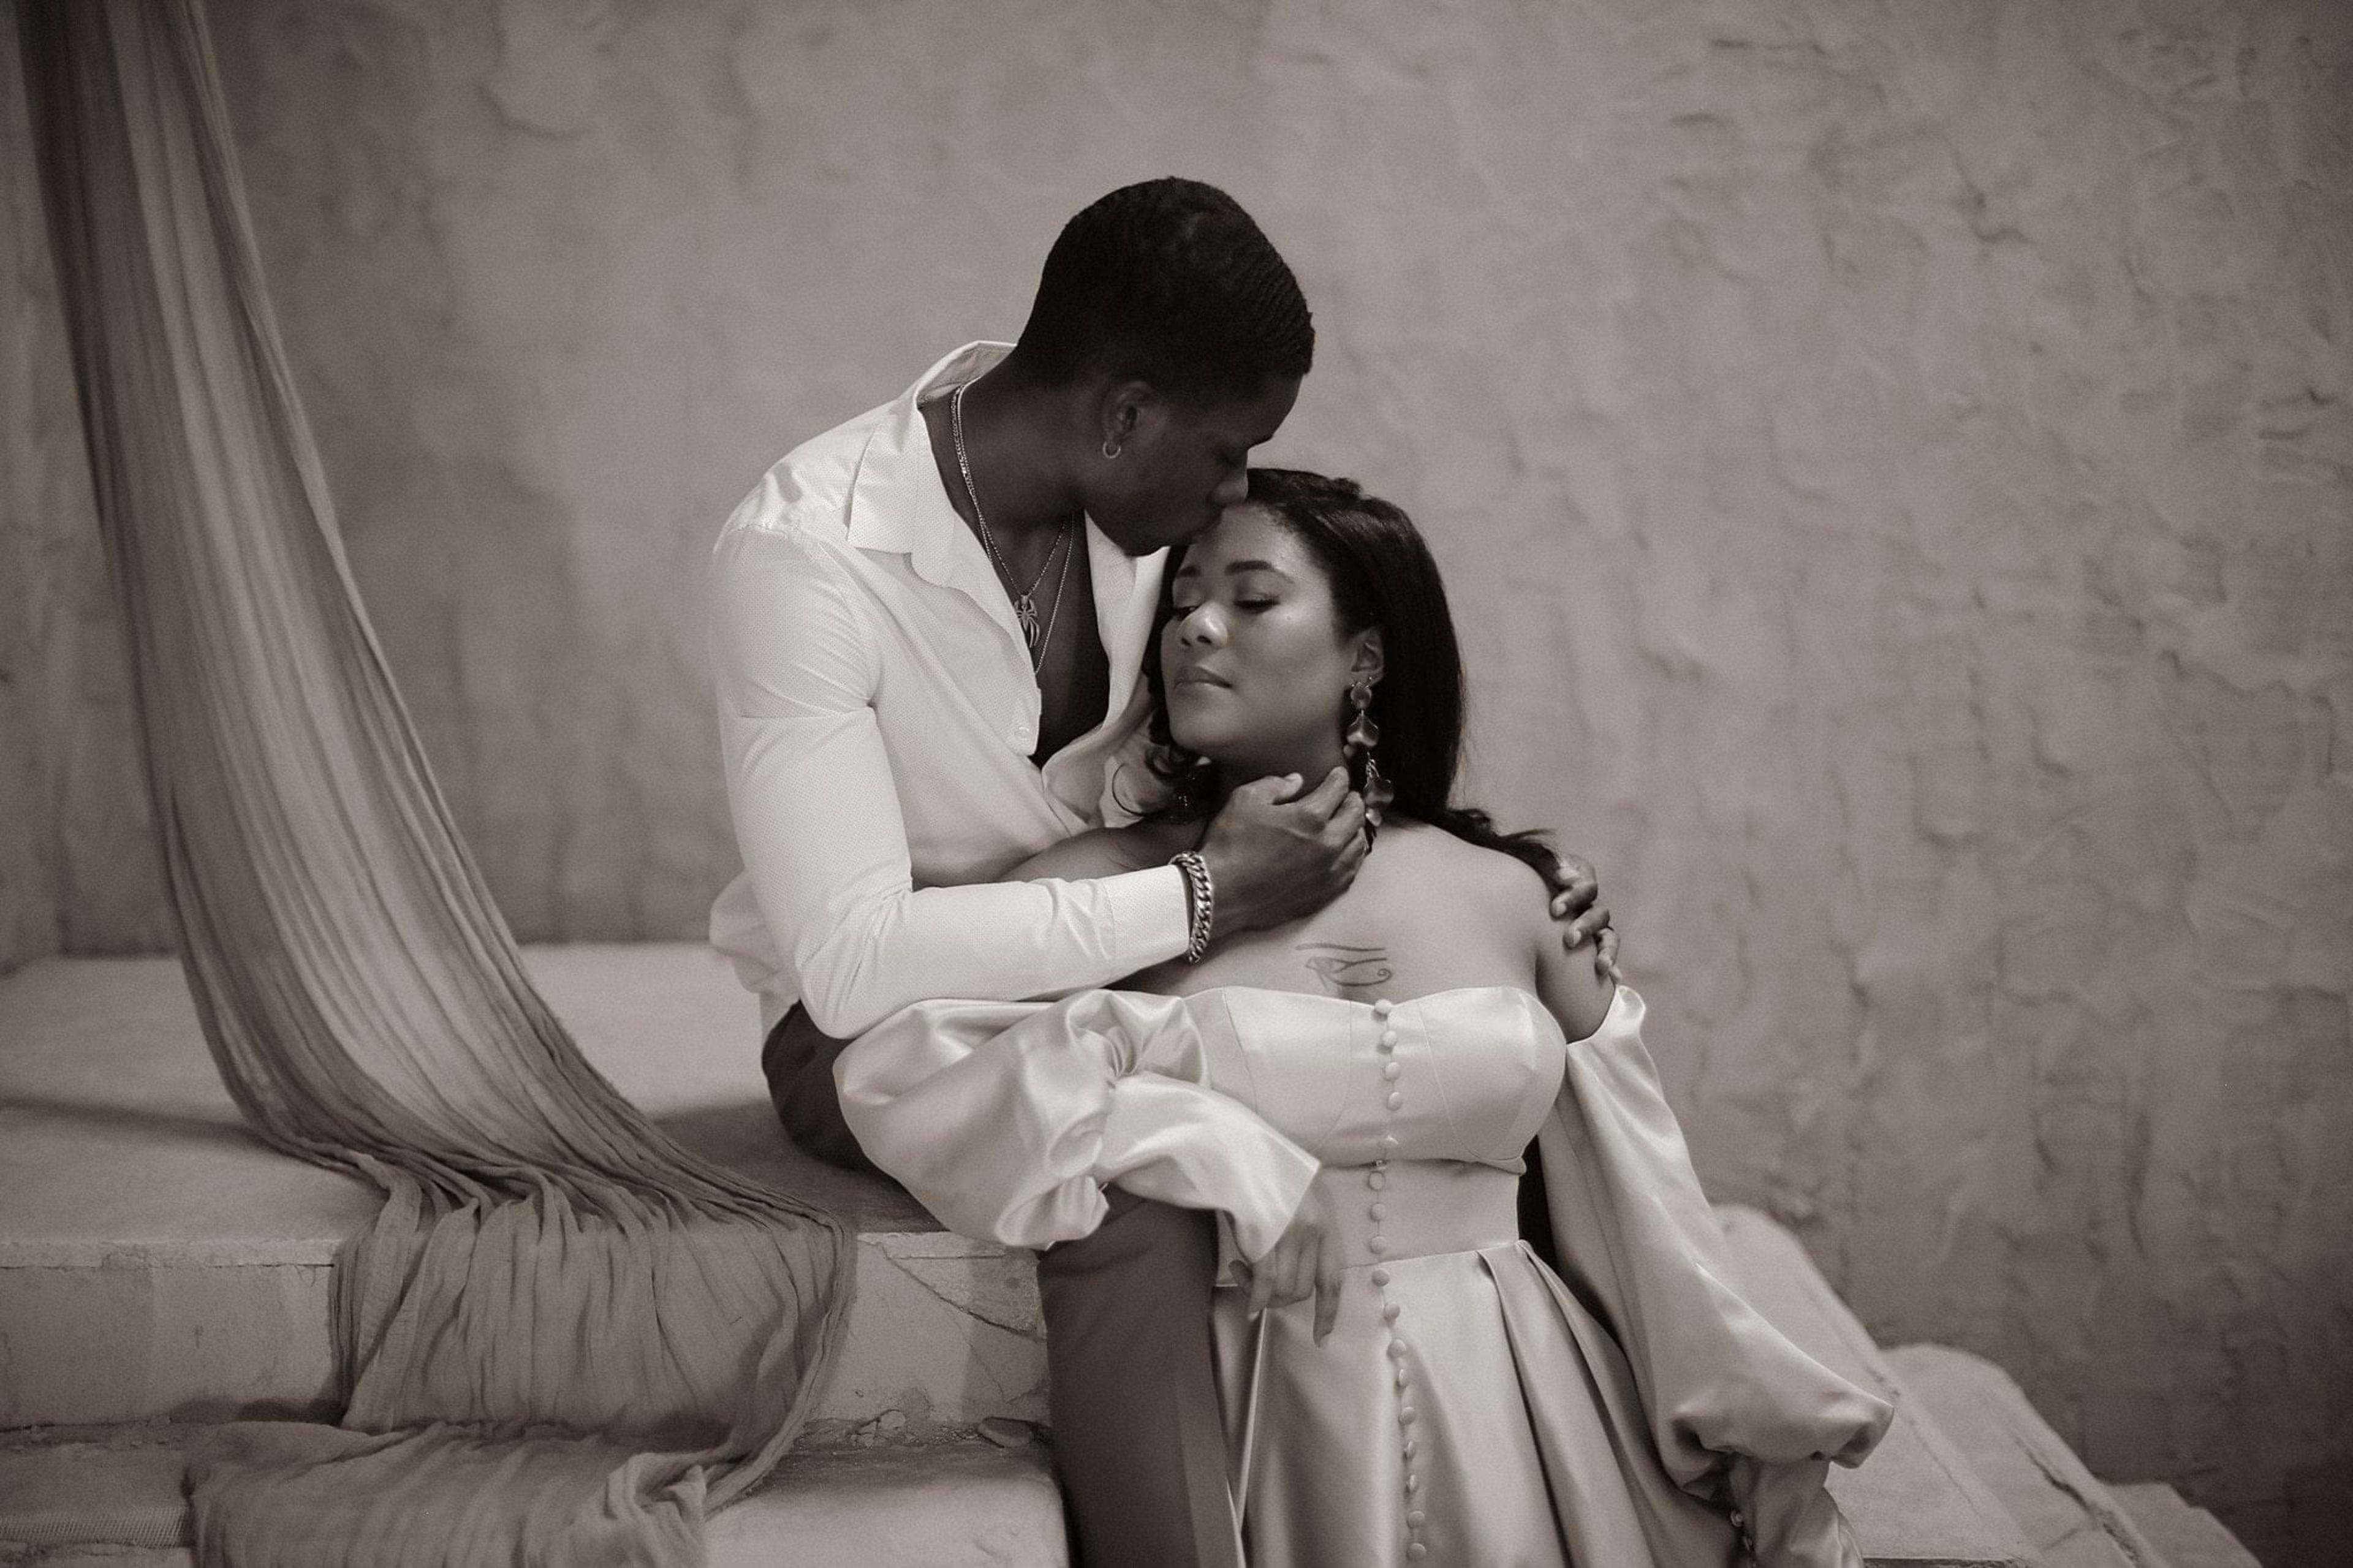 A couple during a black and white photoshoot, with the man kneeling down next to the woman in a dress.